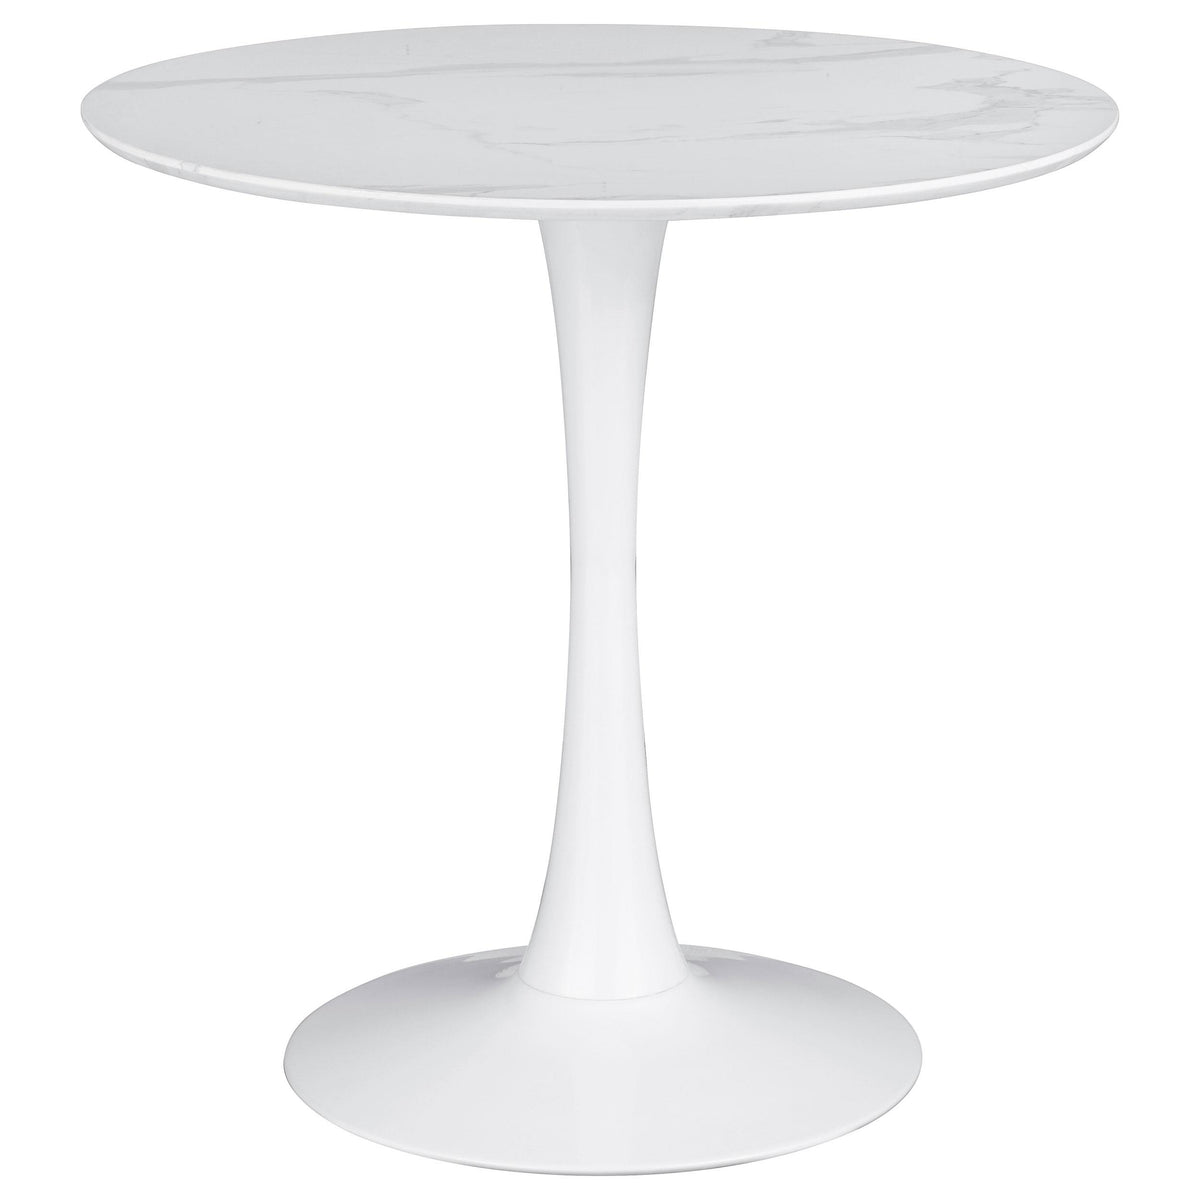 Arkell 30-inch Round Pedestal Dining Table White  Las Vegas Furniture Stores